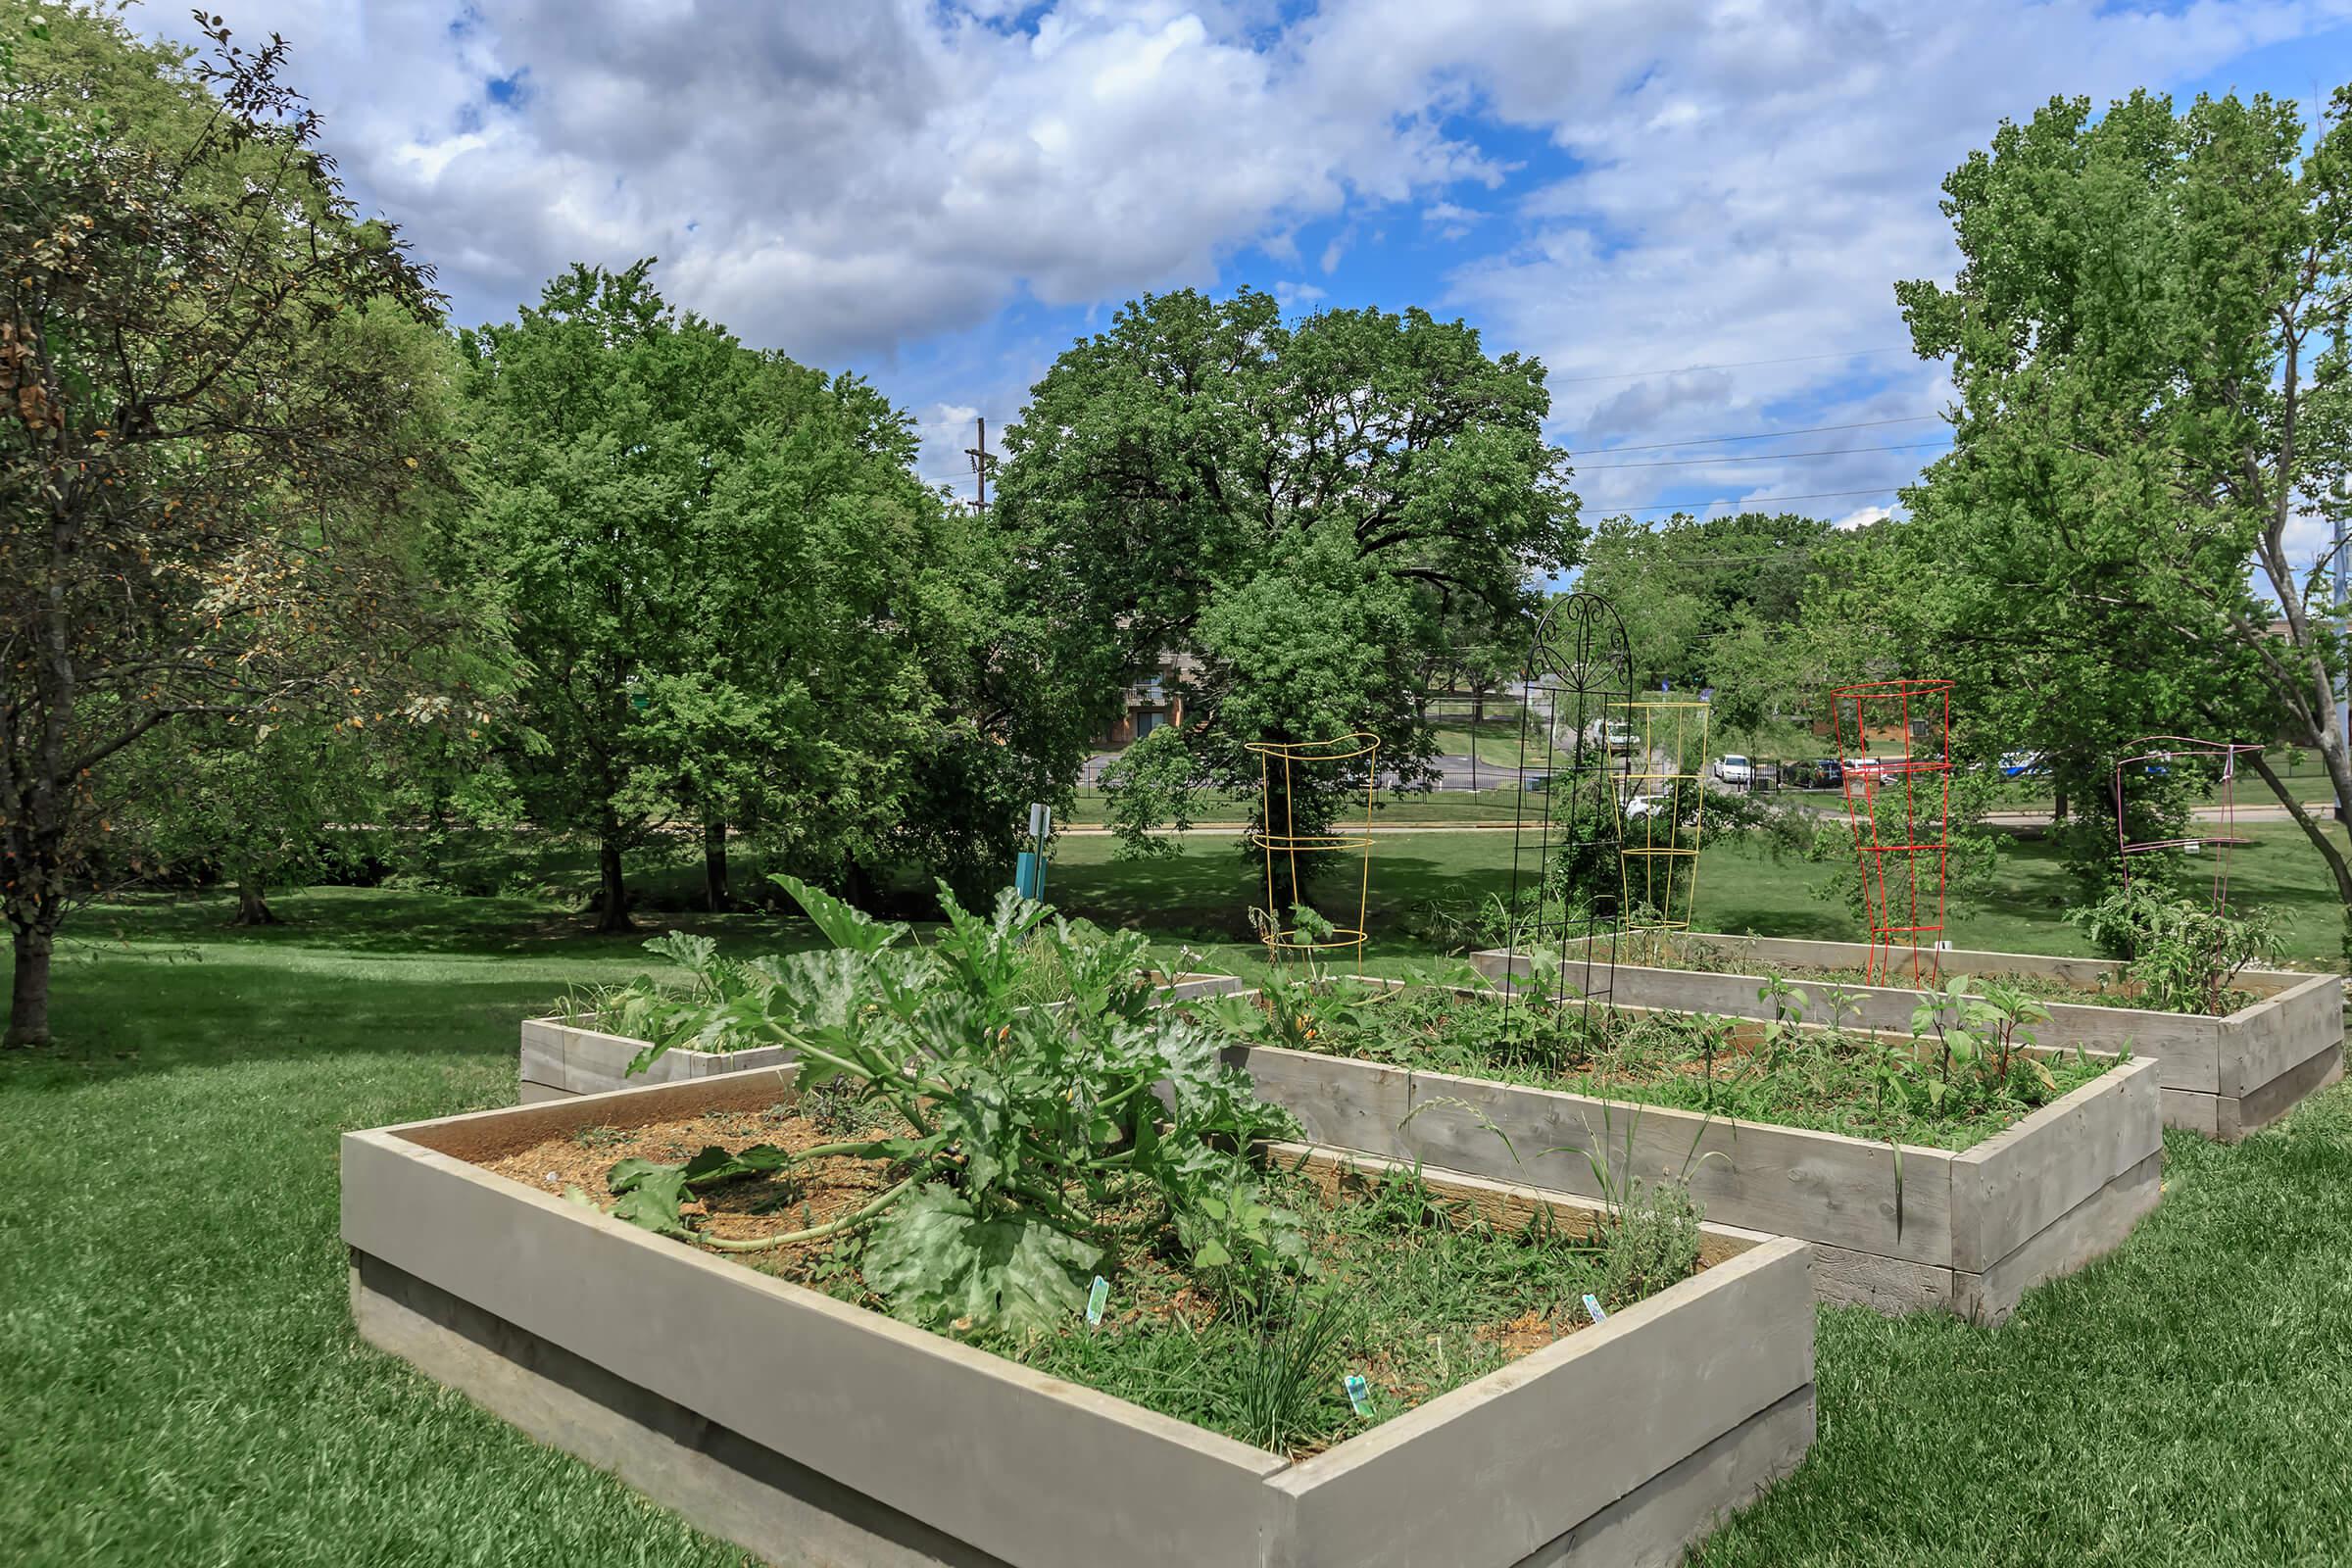 spend time at the community vegetable garden